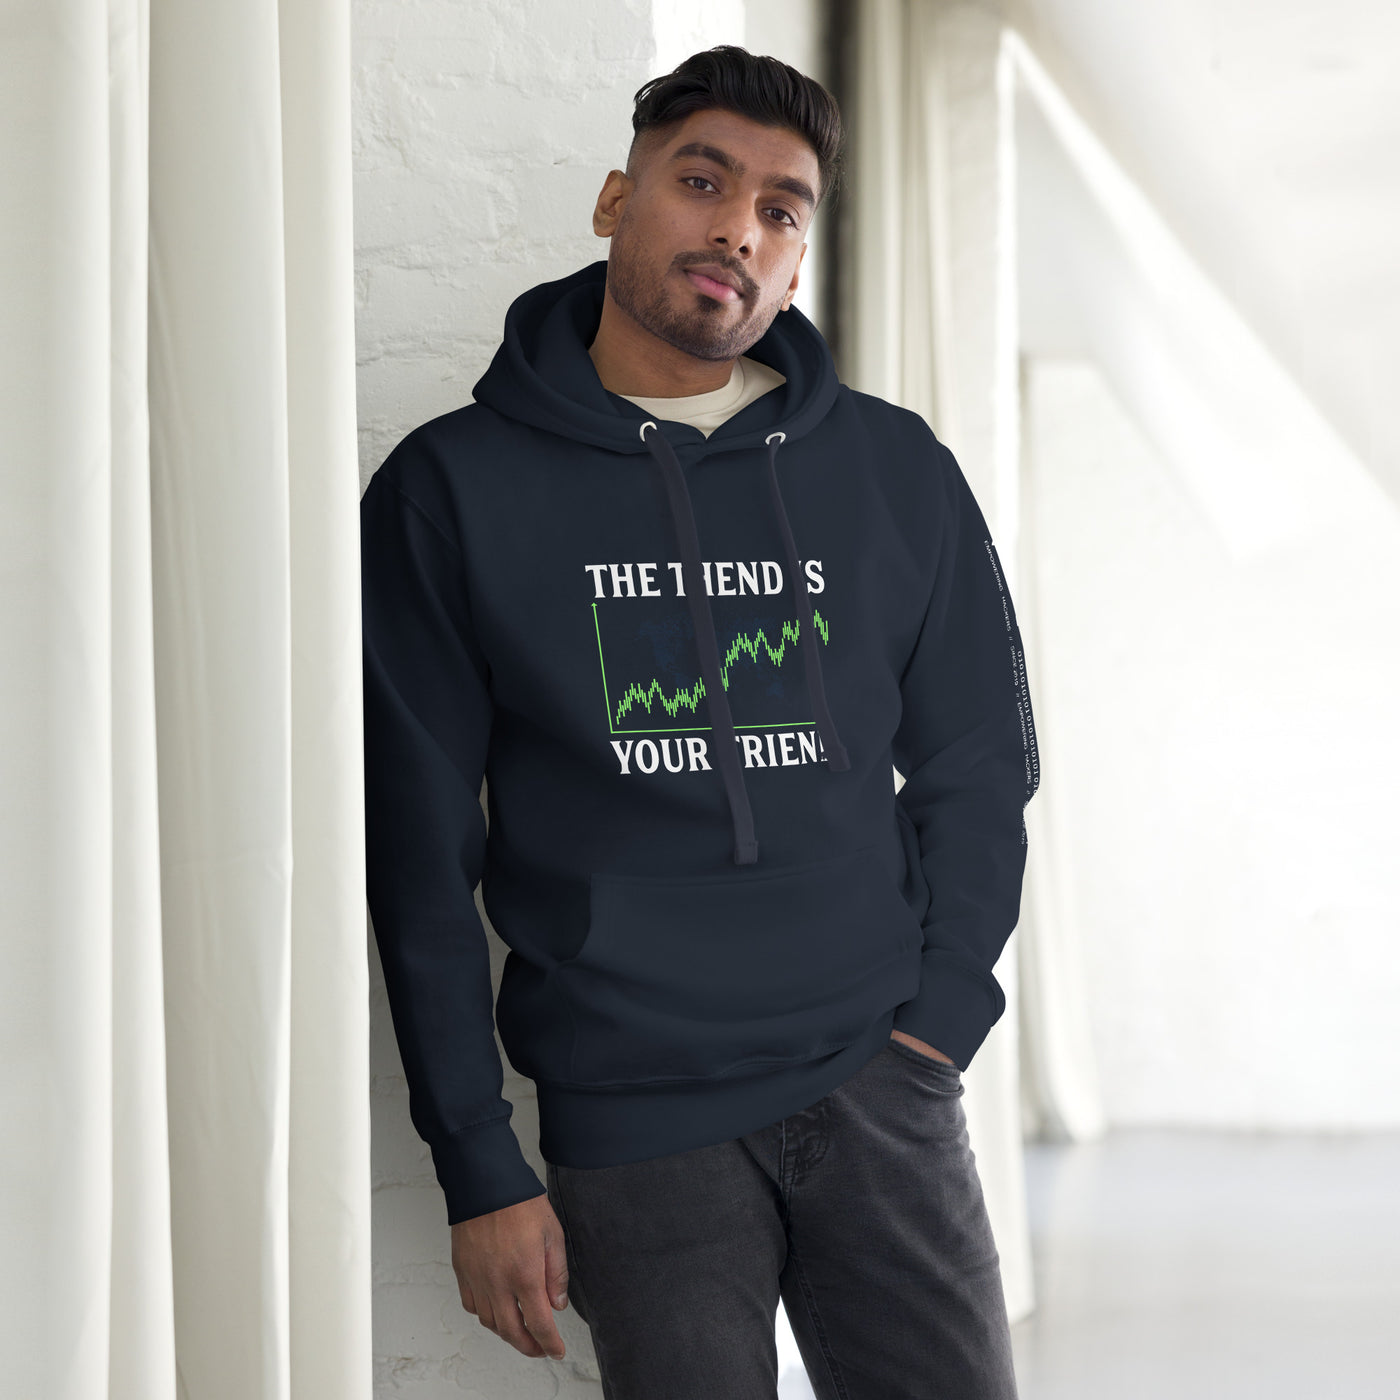 The Trend is your friend - Unisex Hoodie